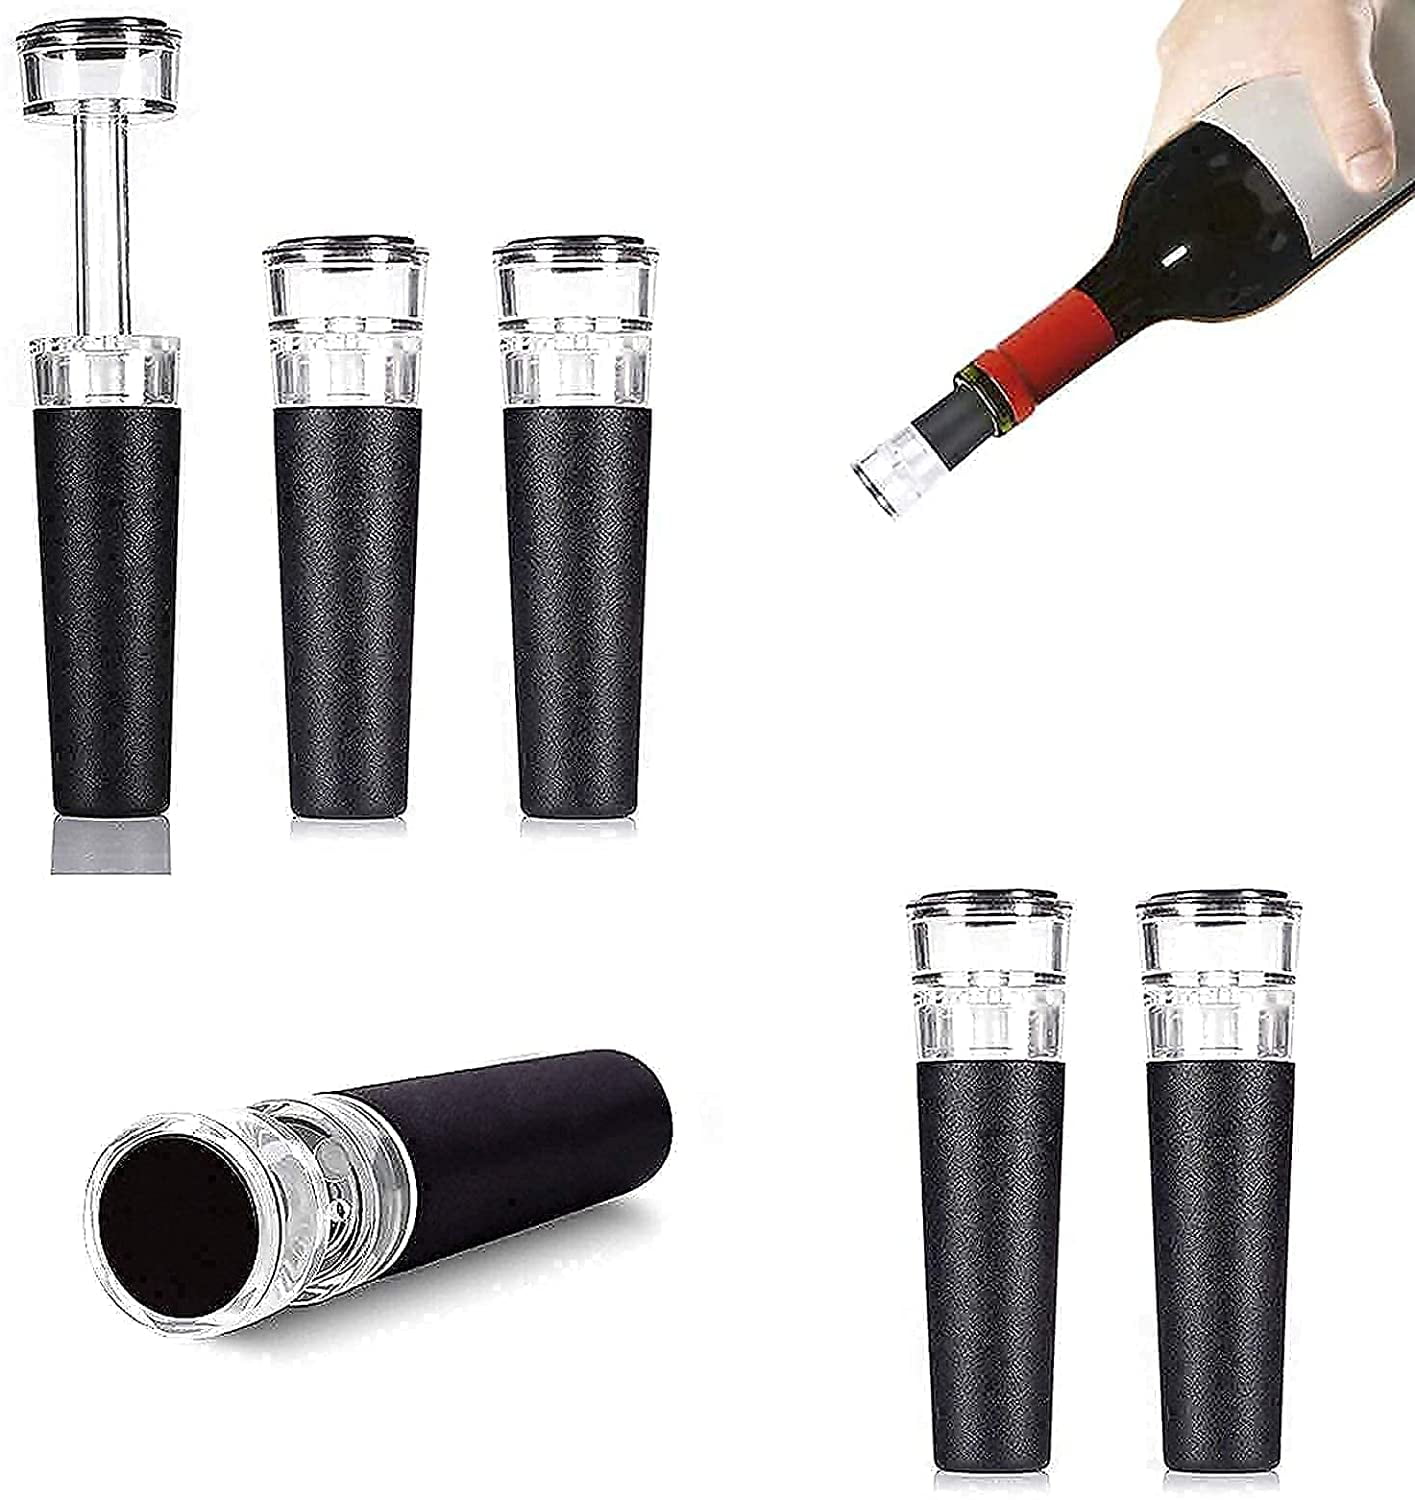 New 6 Wine Stoppers for Wine Saver Vacuum Pump Preserver Best Wine Air Vacuum Stoppers to Keep Wine Fresh Bottle Rubber Corks to Preserve Wine Flavor